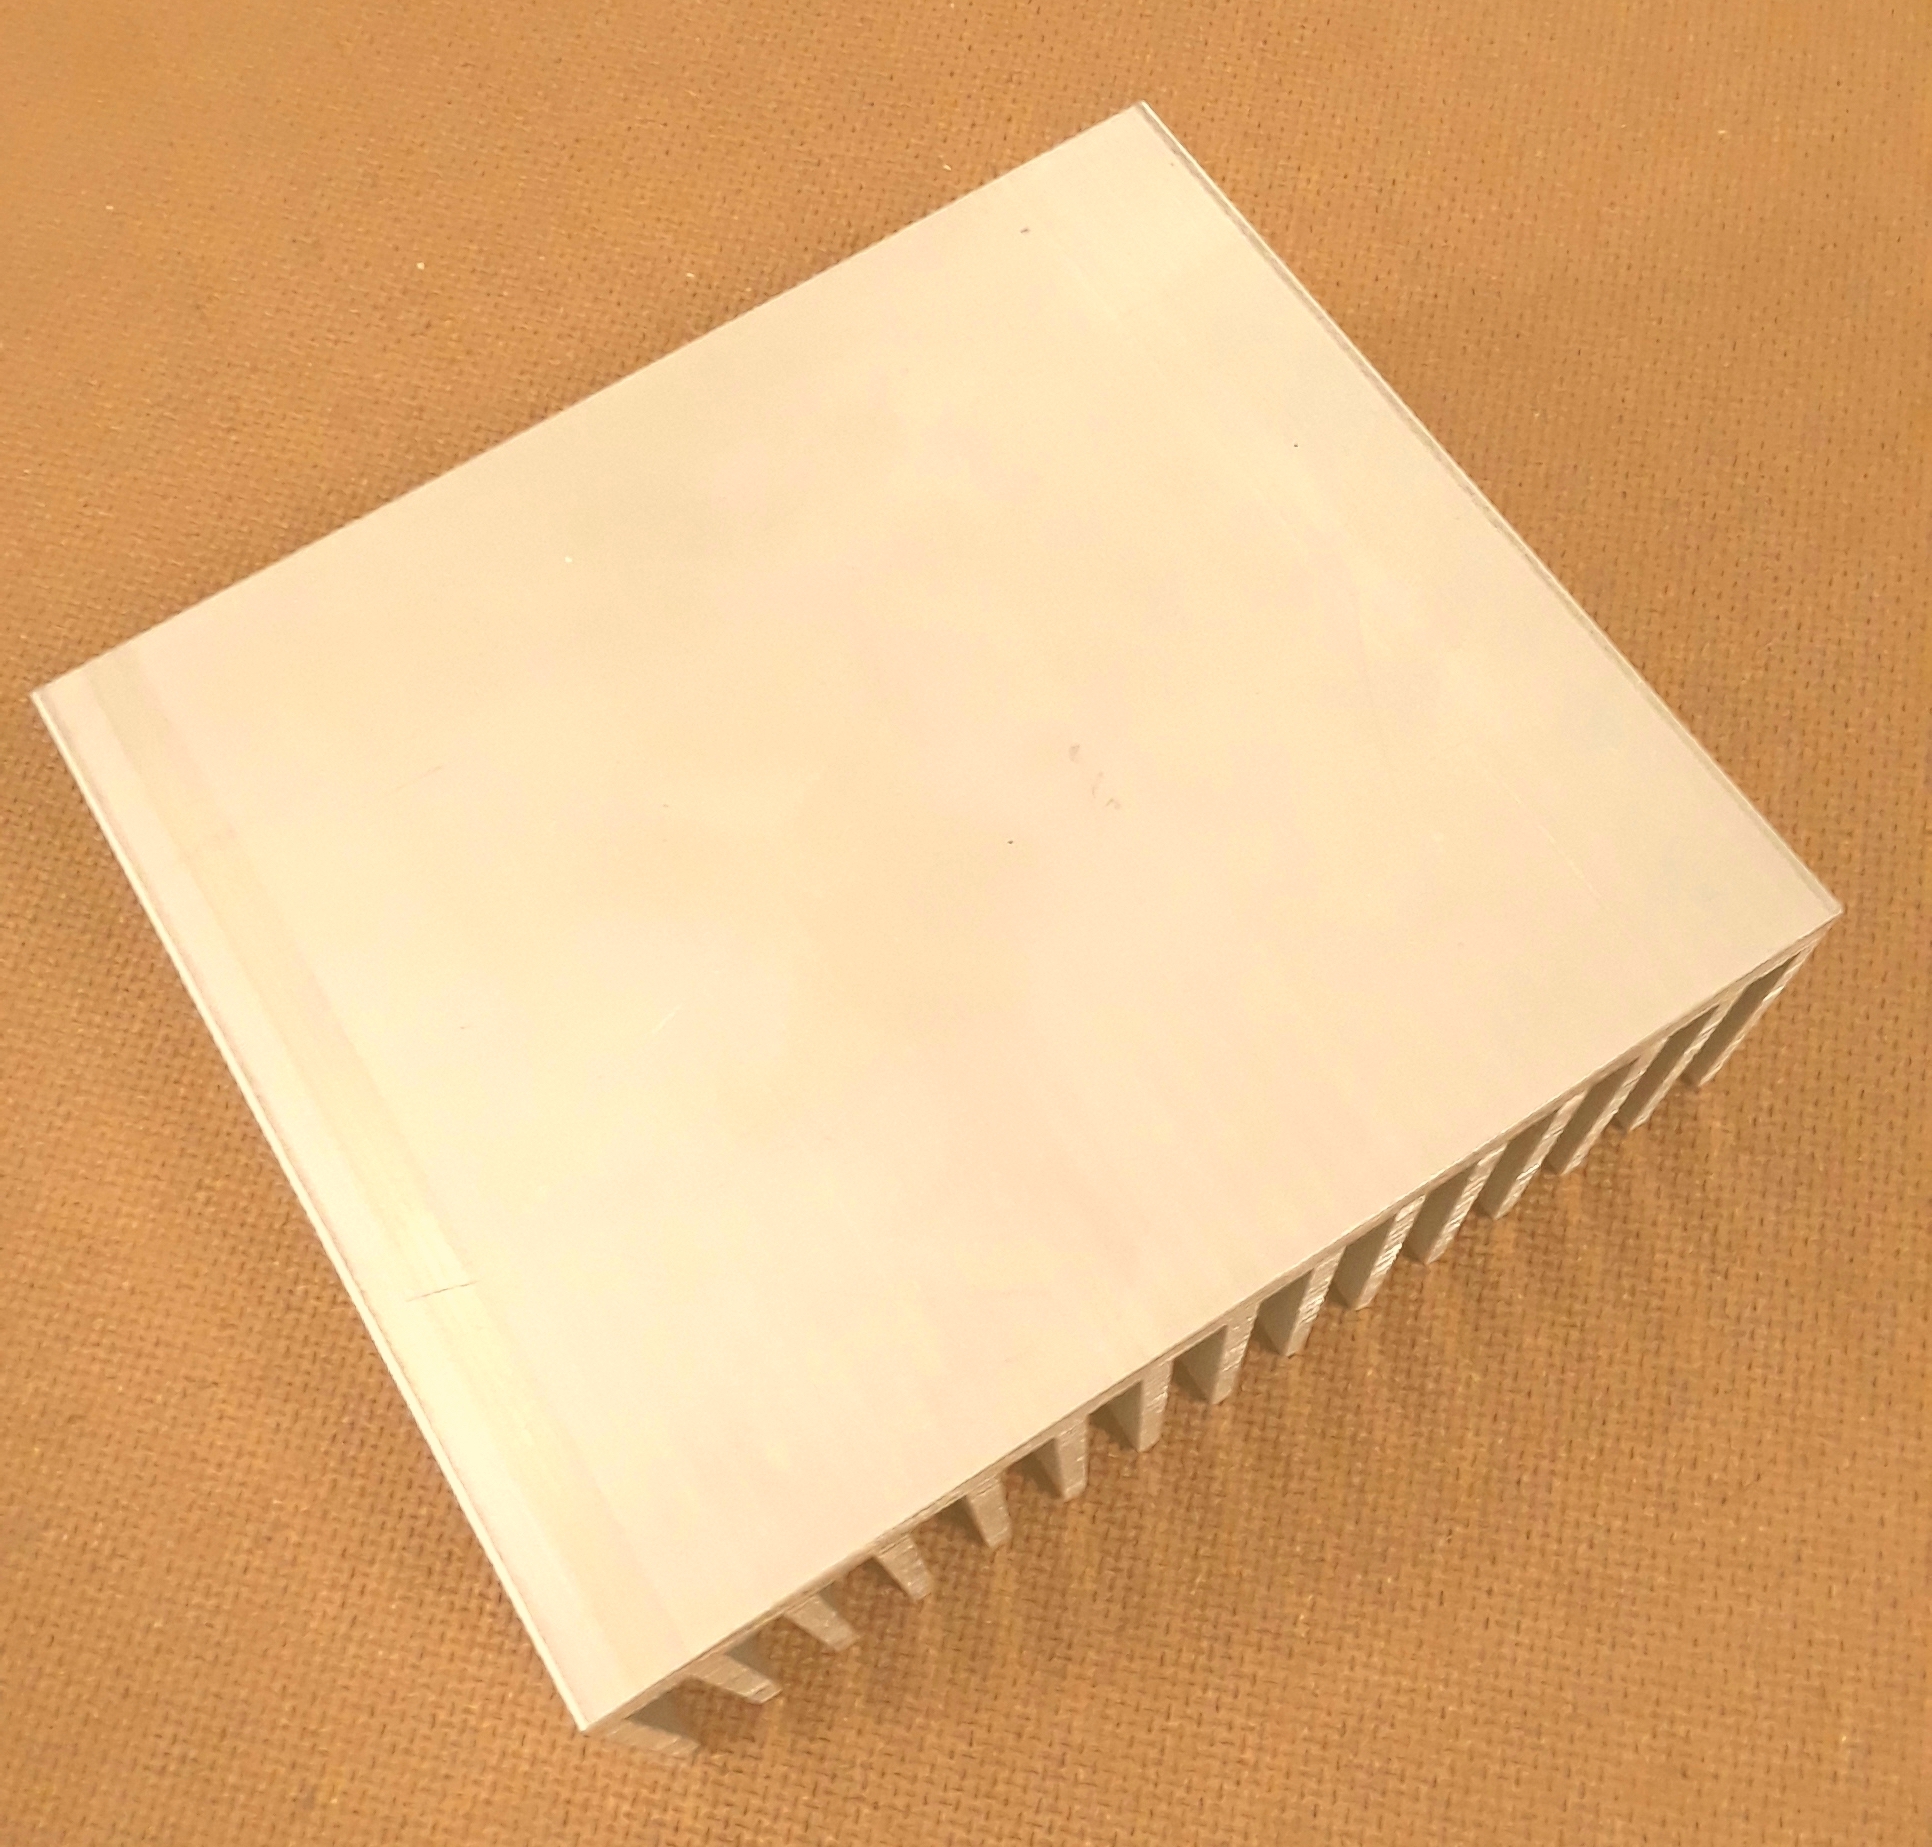 inches Low Thermal Resistance. 3 inch Heat Sink Aluminum 3.0 x 2.425 x 0.813 